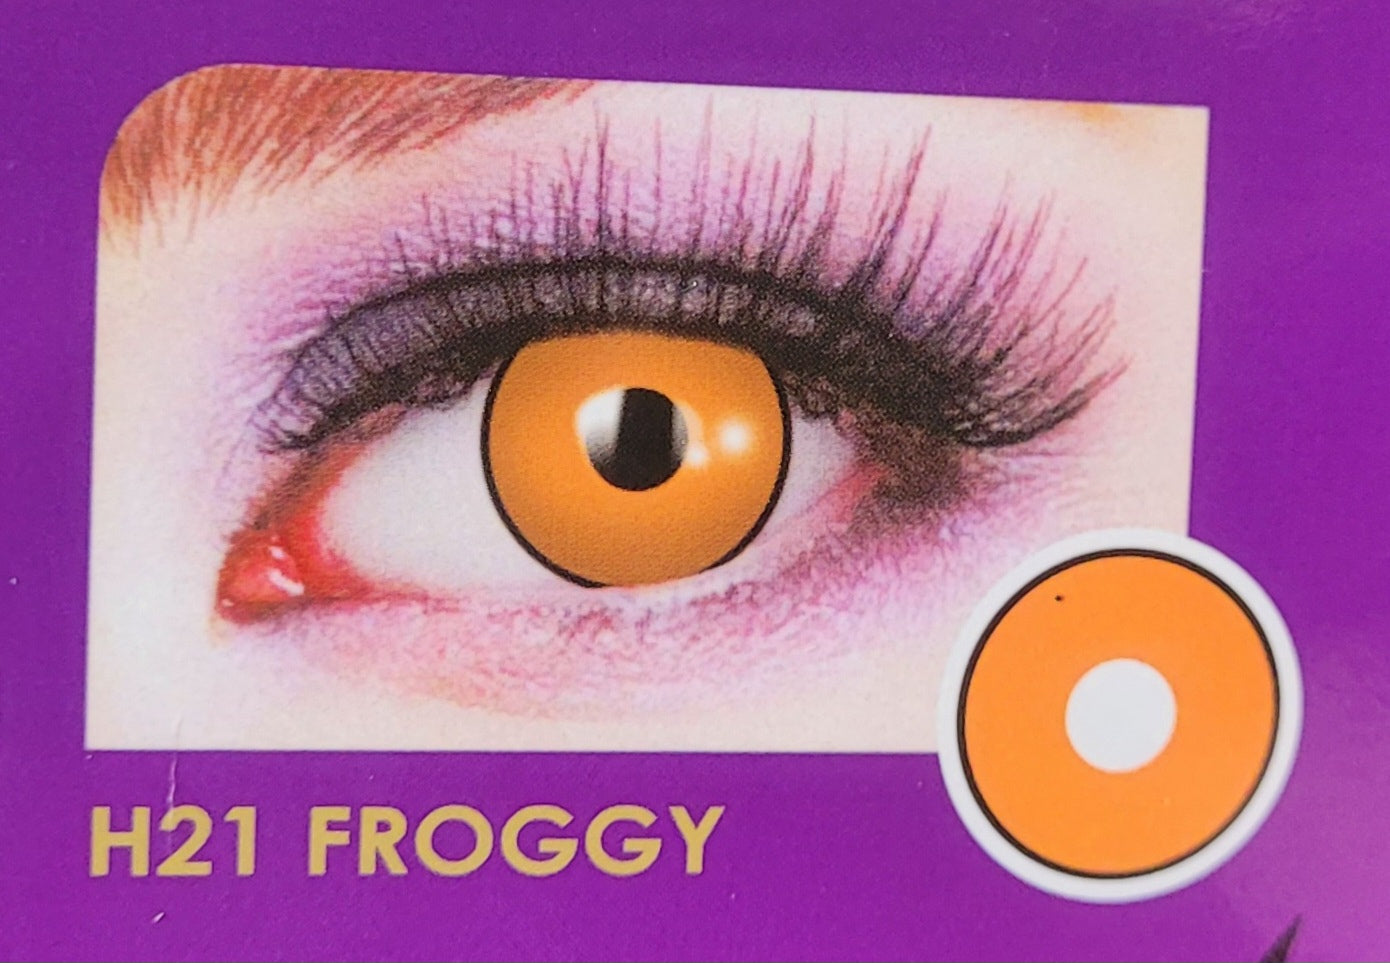 Froggy Contacts